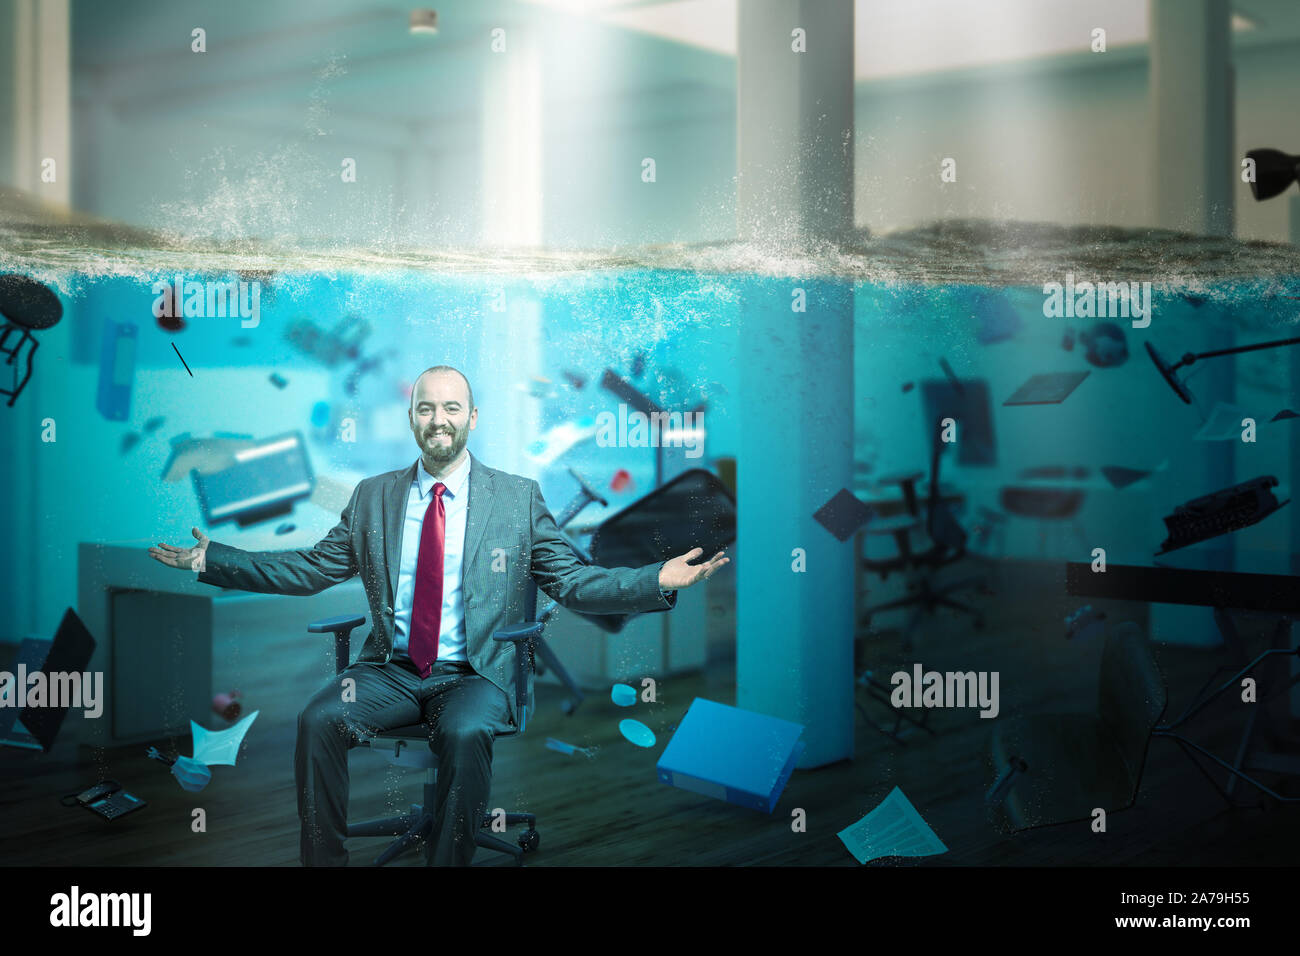 smiling businessman sitting in an office completely flooded with objects floating in the water. concept of problems at work and positive vision. Stock Photo